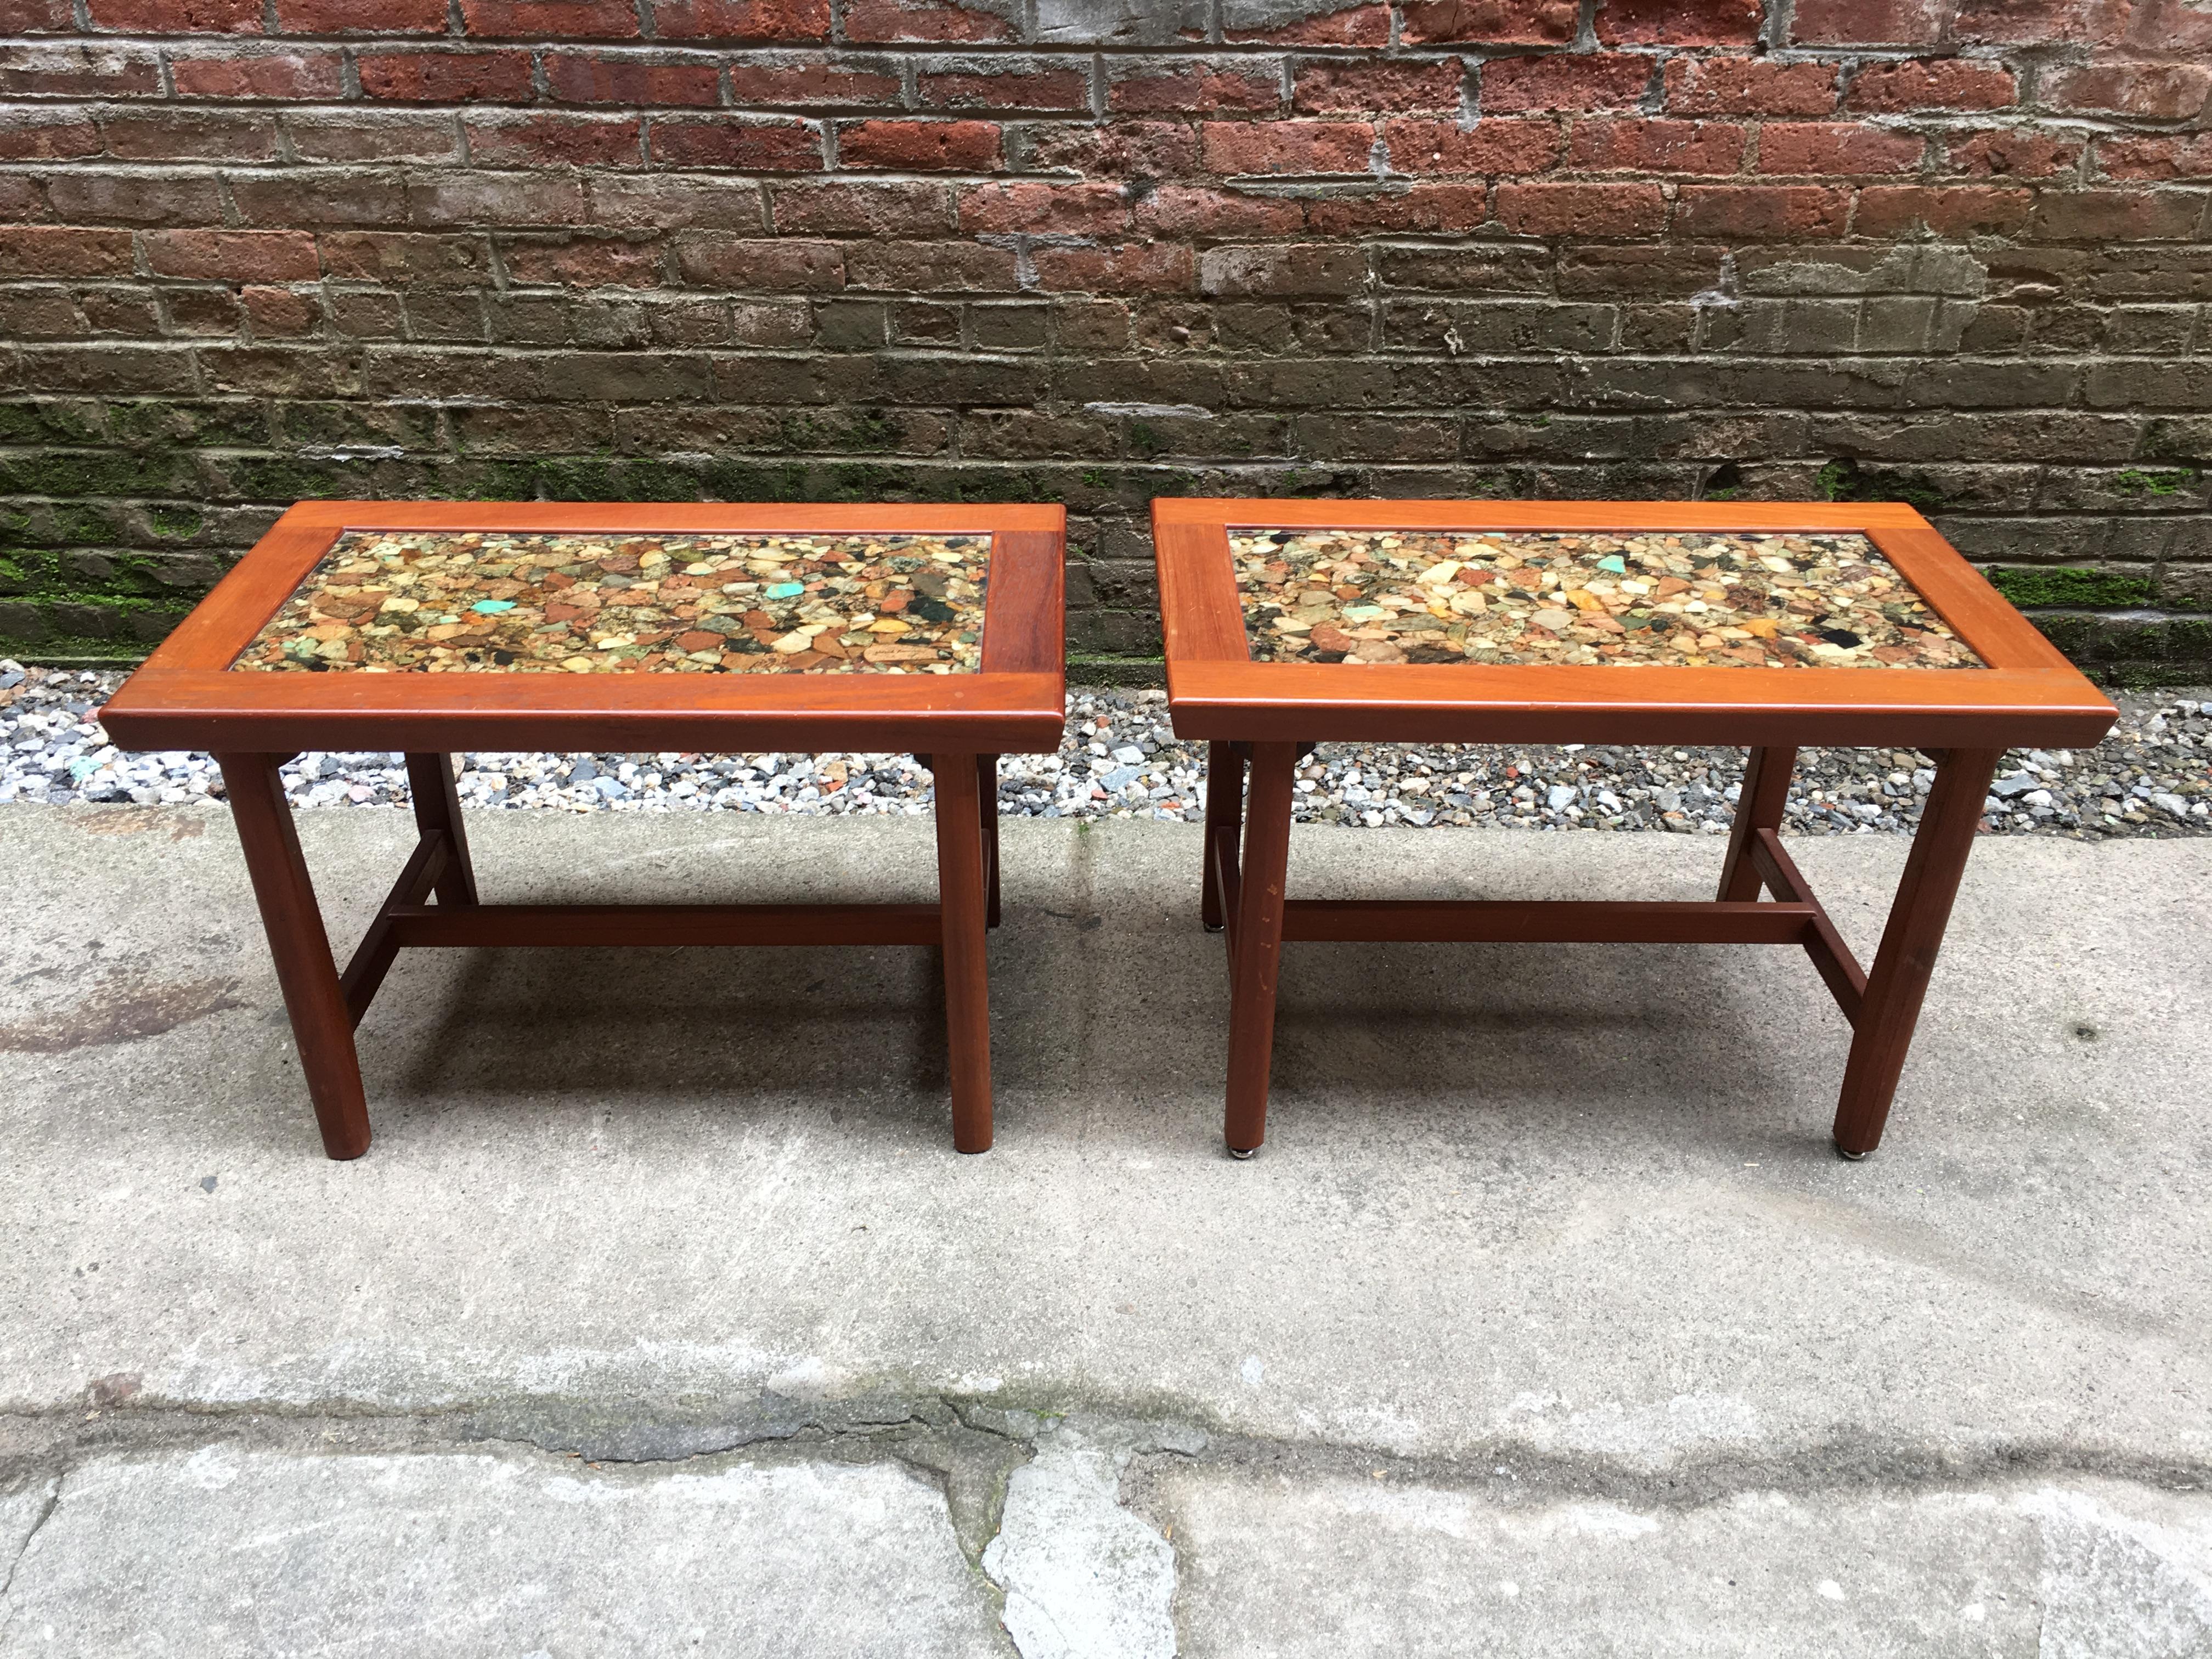 Solid teak construction with encased resin mineral and rock specimens, designed by Arvid Haerum for Sola Mobelfabrik. All varieties and color full rock and minerals. Possibly custom made tables dating from the late 1960s. One is actually stamp